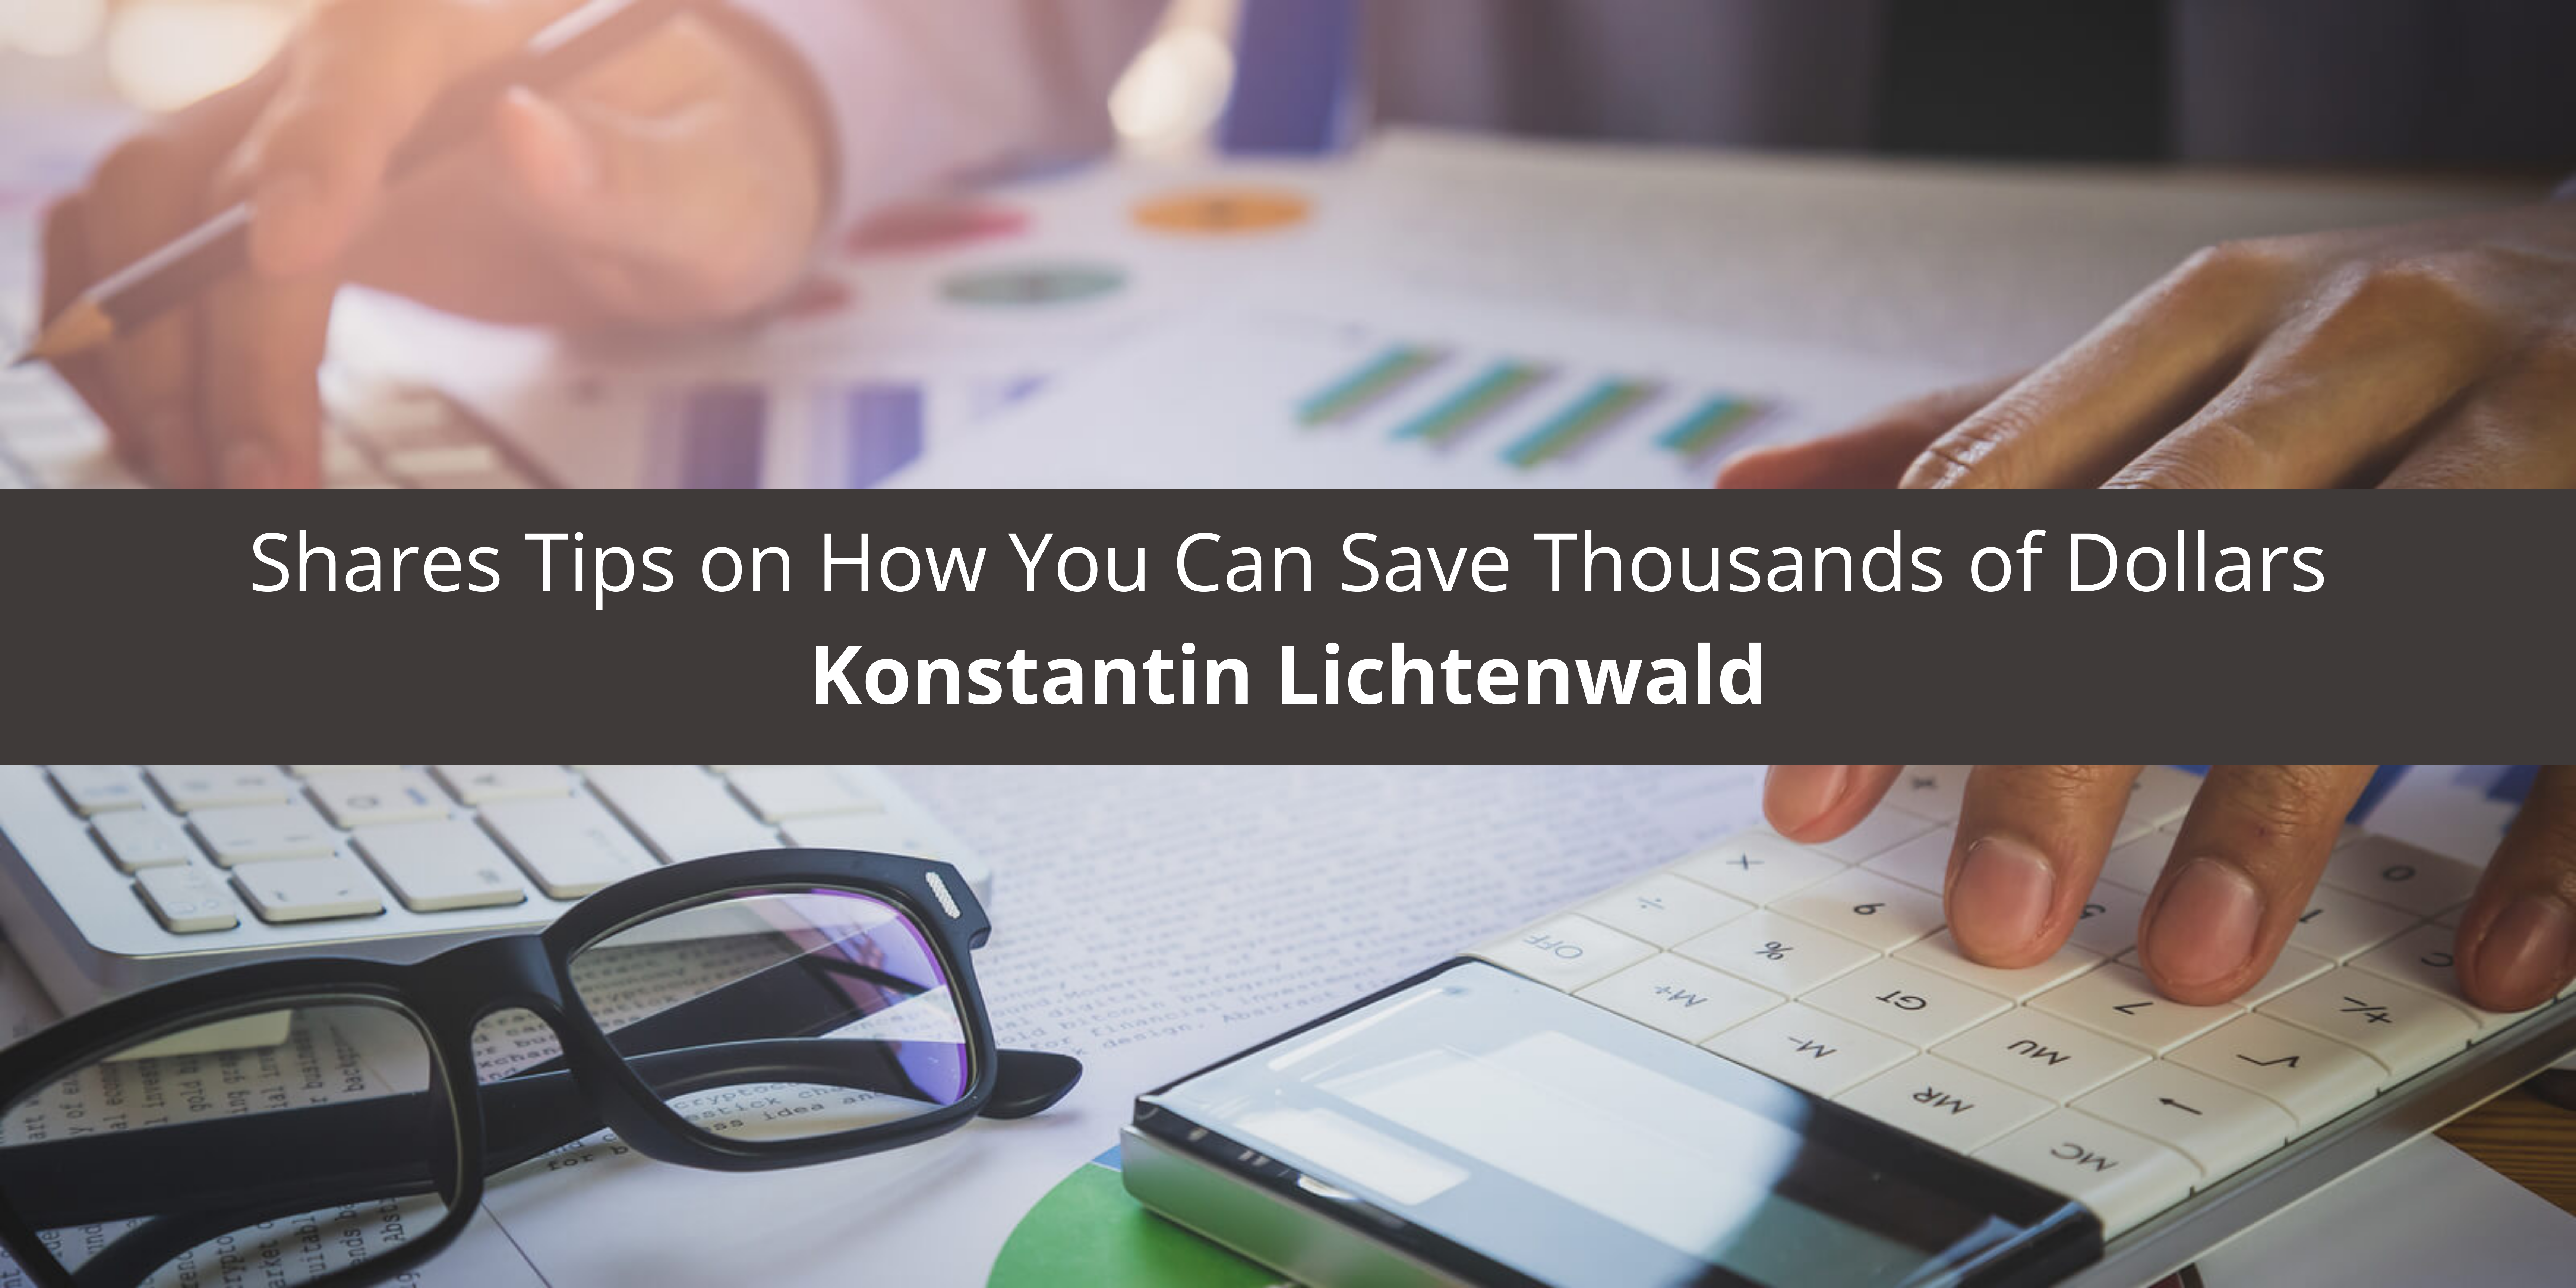 Konstantin Lichtenwald based in Vancouver Shares Tips on How You Can Save Thousands of Dollars